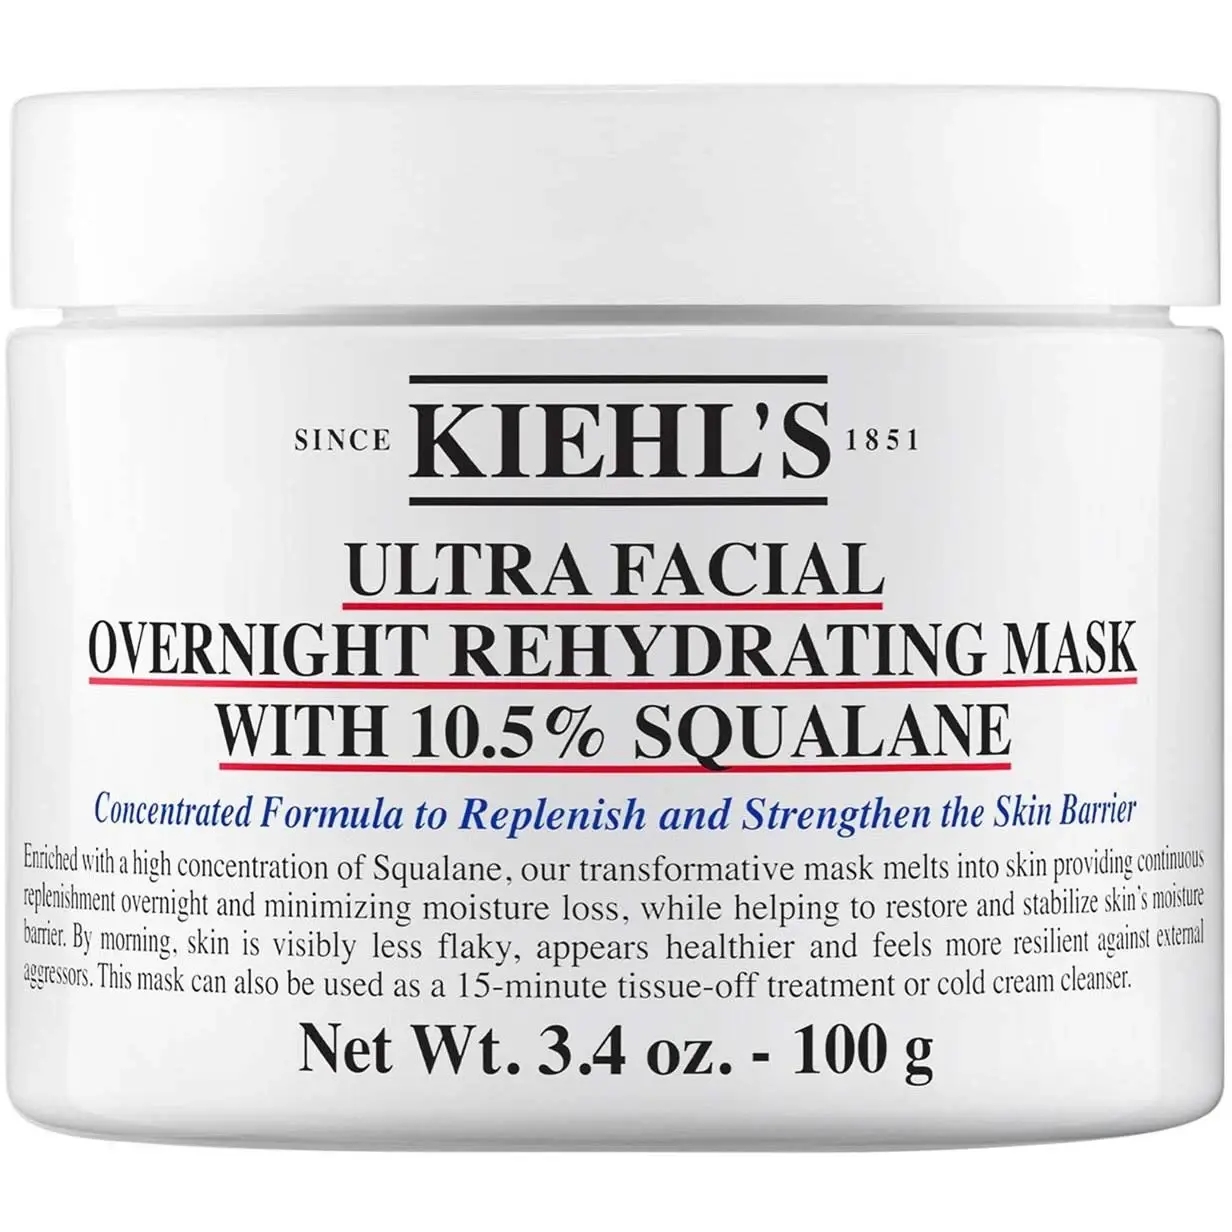 Kiehl's Ultra Facial Overnight Rehydrating Mask with 10.5% Squalane 1